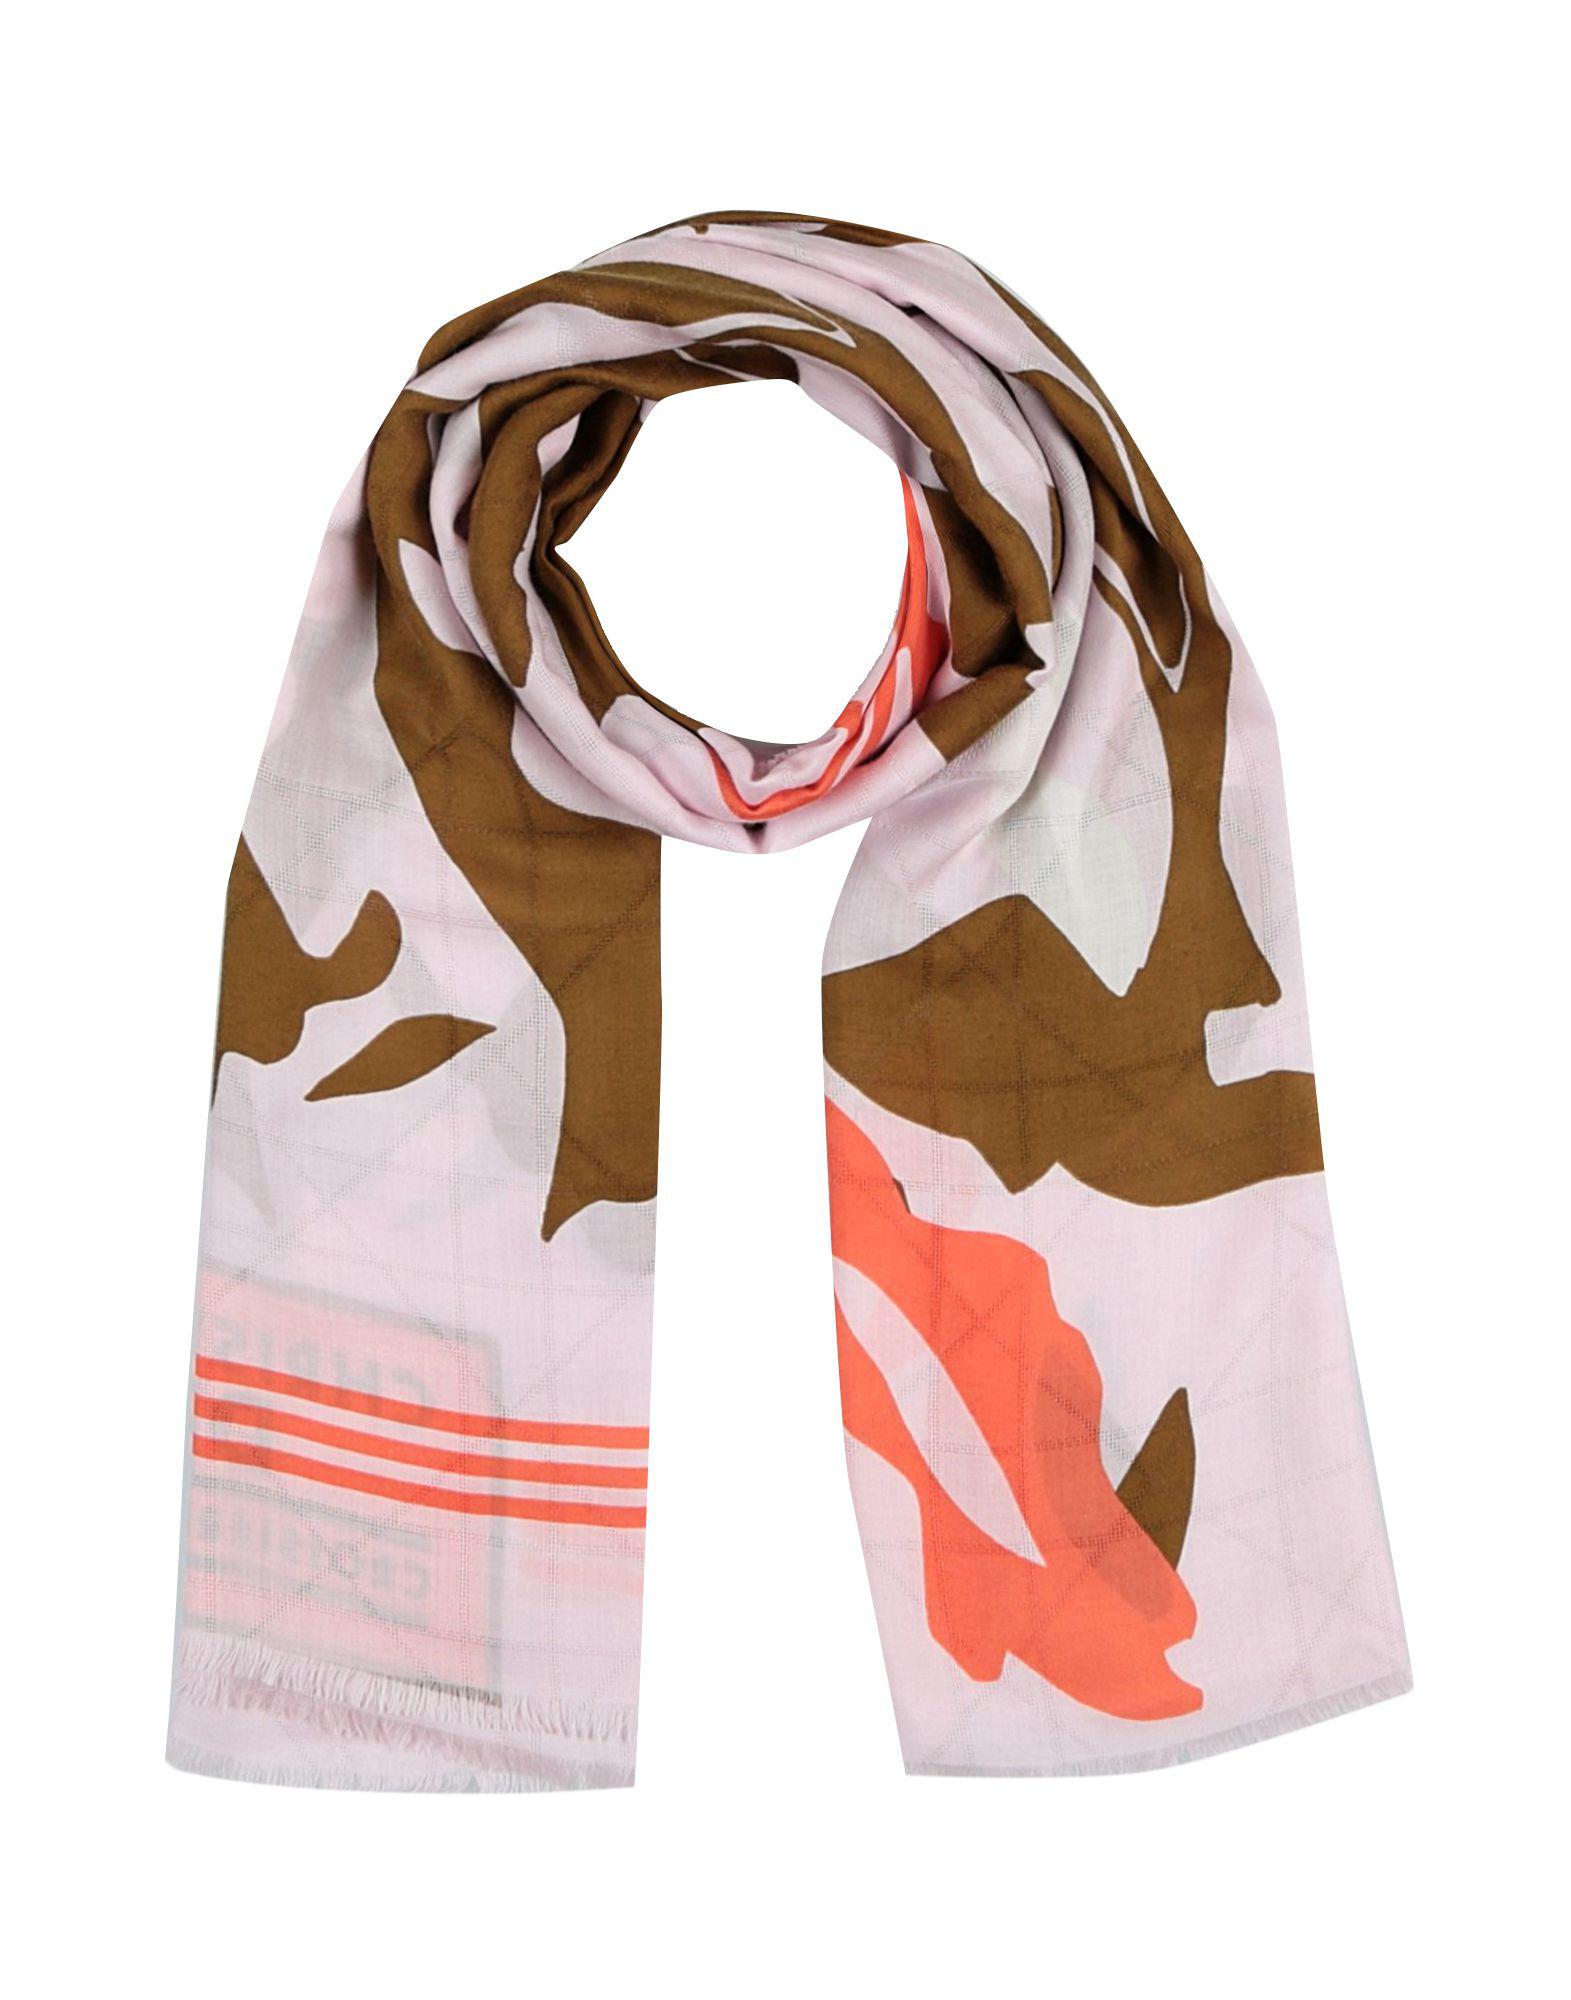 Dior Flannel Scarf in Pink - Lyst